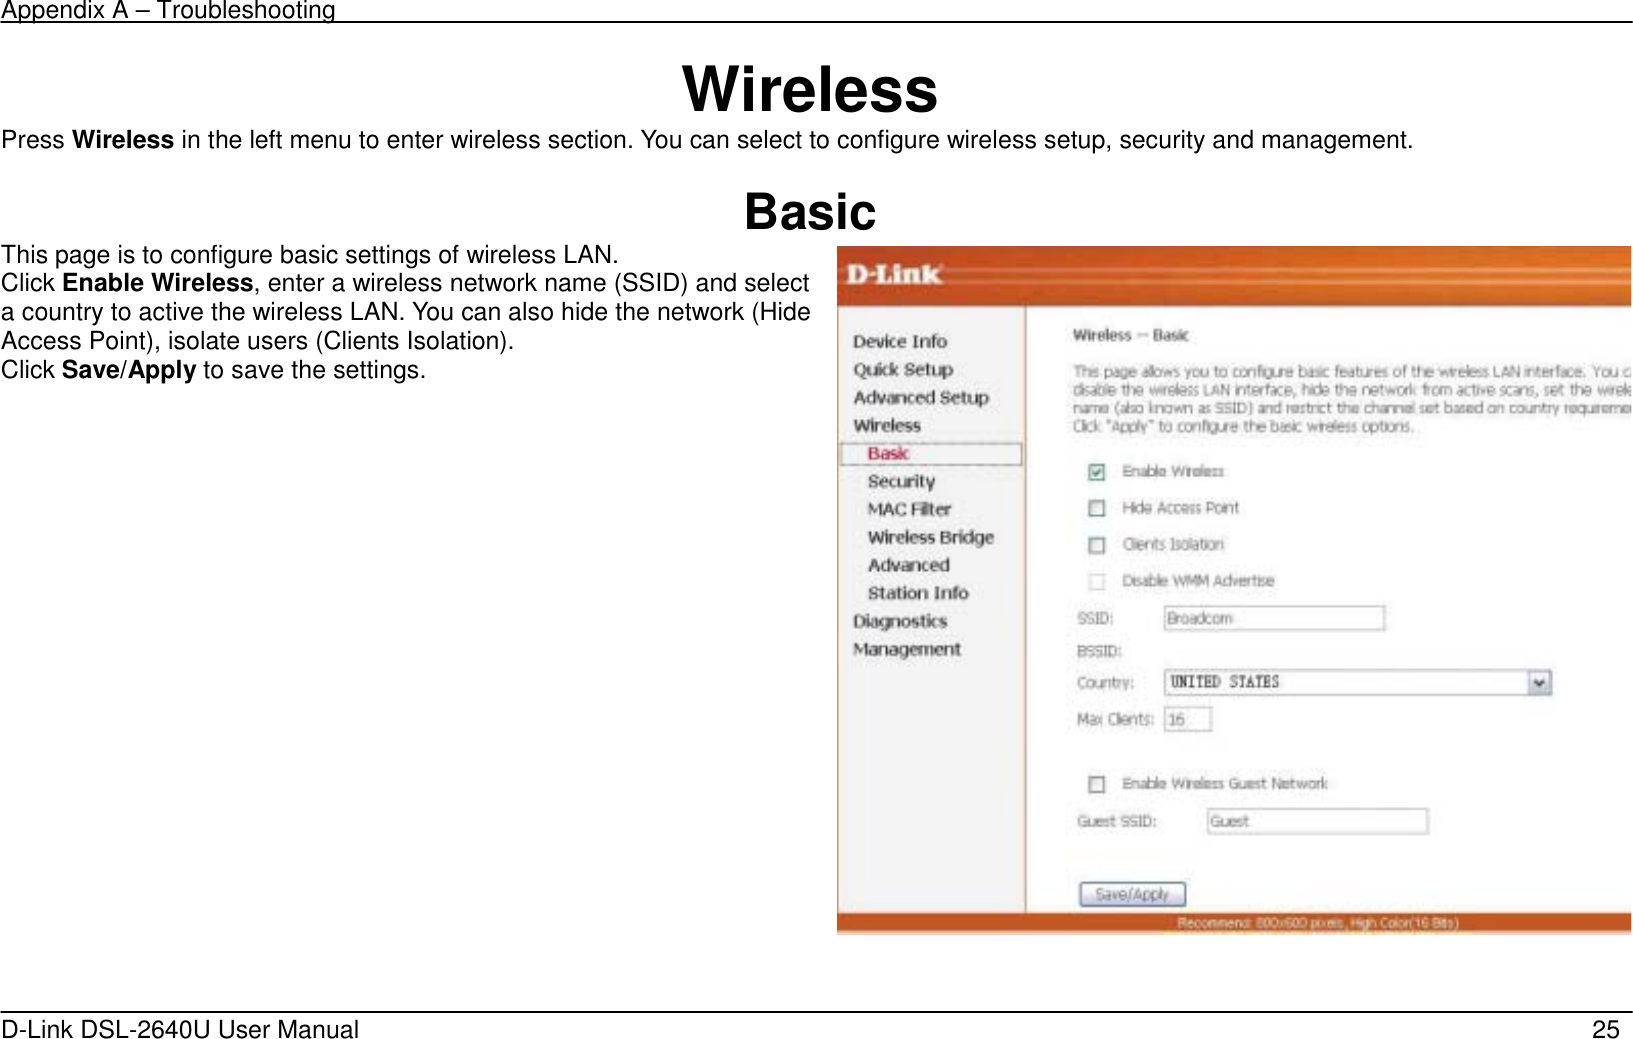 Appendix A – Troubleshooting   D-Link DSL-2640U User Manual    25 Wireless Press Wireless in the left menu to enter wireless section. You can select to configure wireless setup, security and management.  Basic This page is to configure basic settings of wireless LAN. Click Enable Wireless, enter a wireless network name (SSID) and select a country to active the wireless LAN. You can also hide the network (Hide Access Point), isolate users (Clients Isolation). Click Save/Apply to save the settings.    